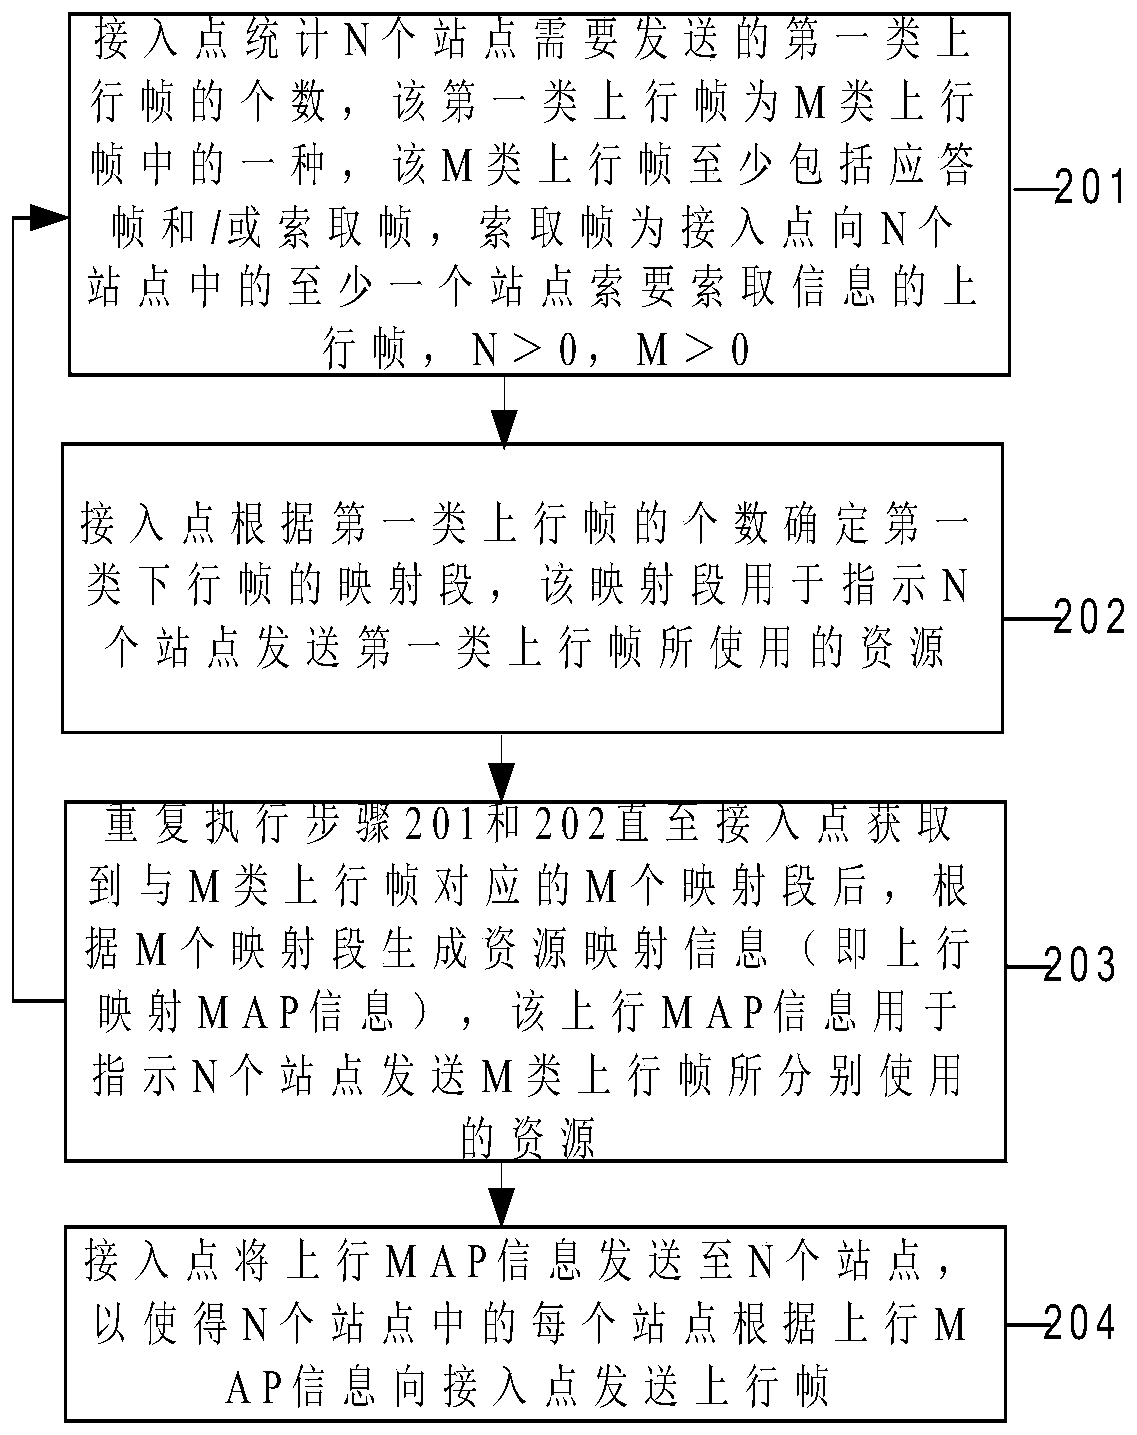 Resource indication method and device